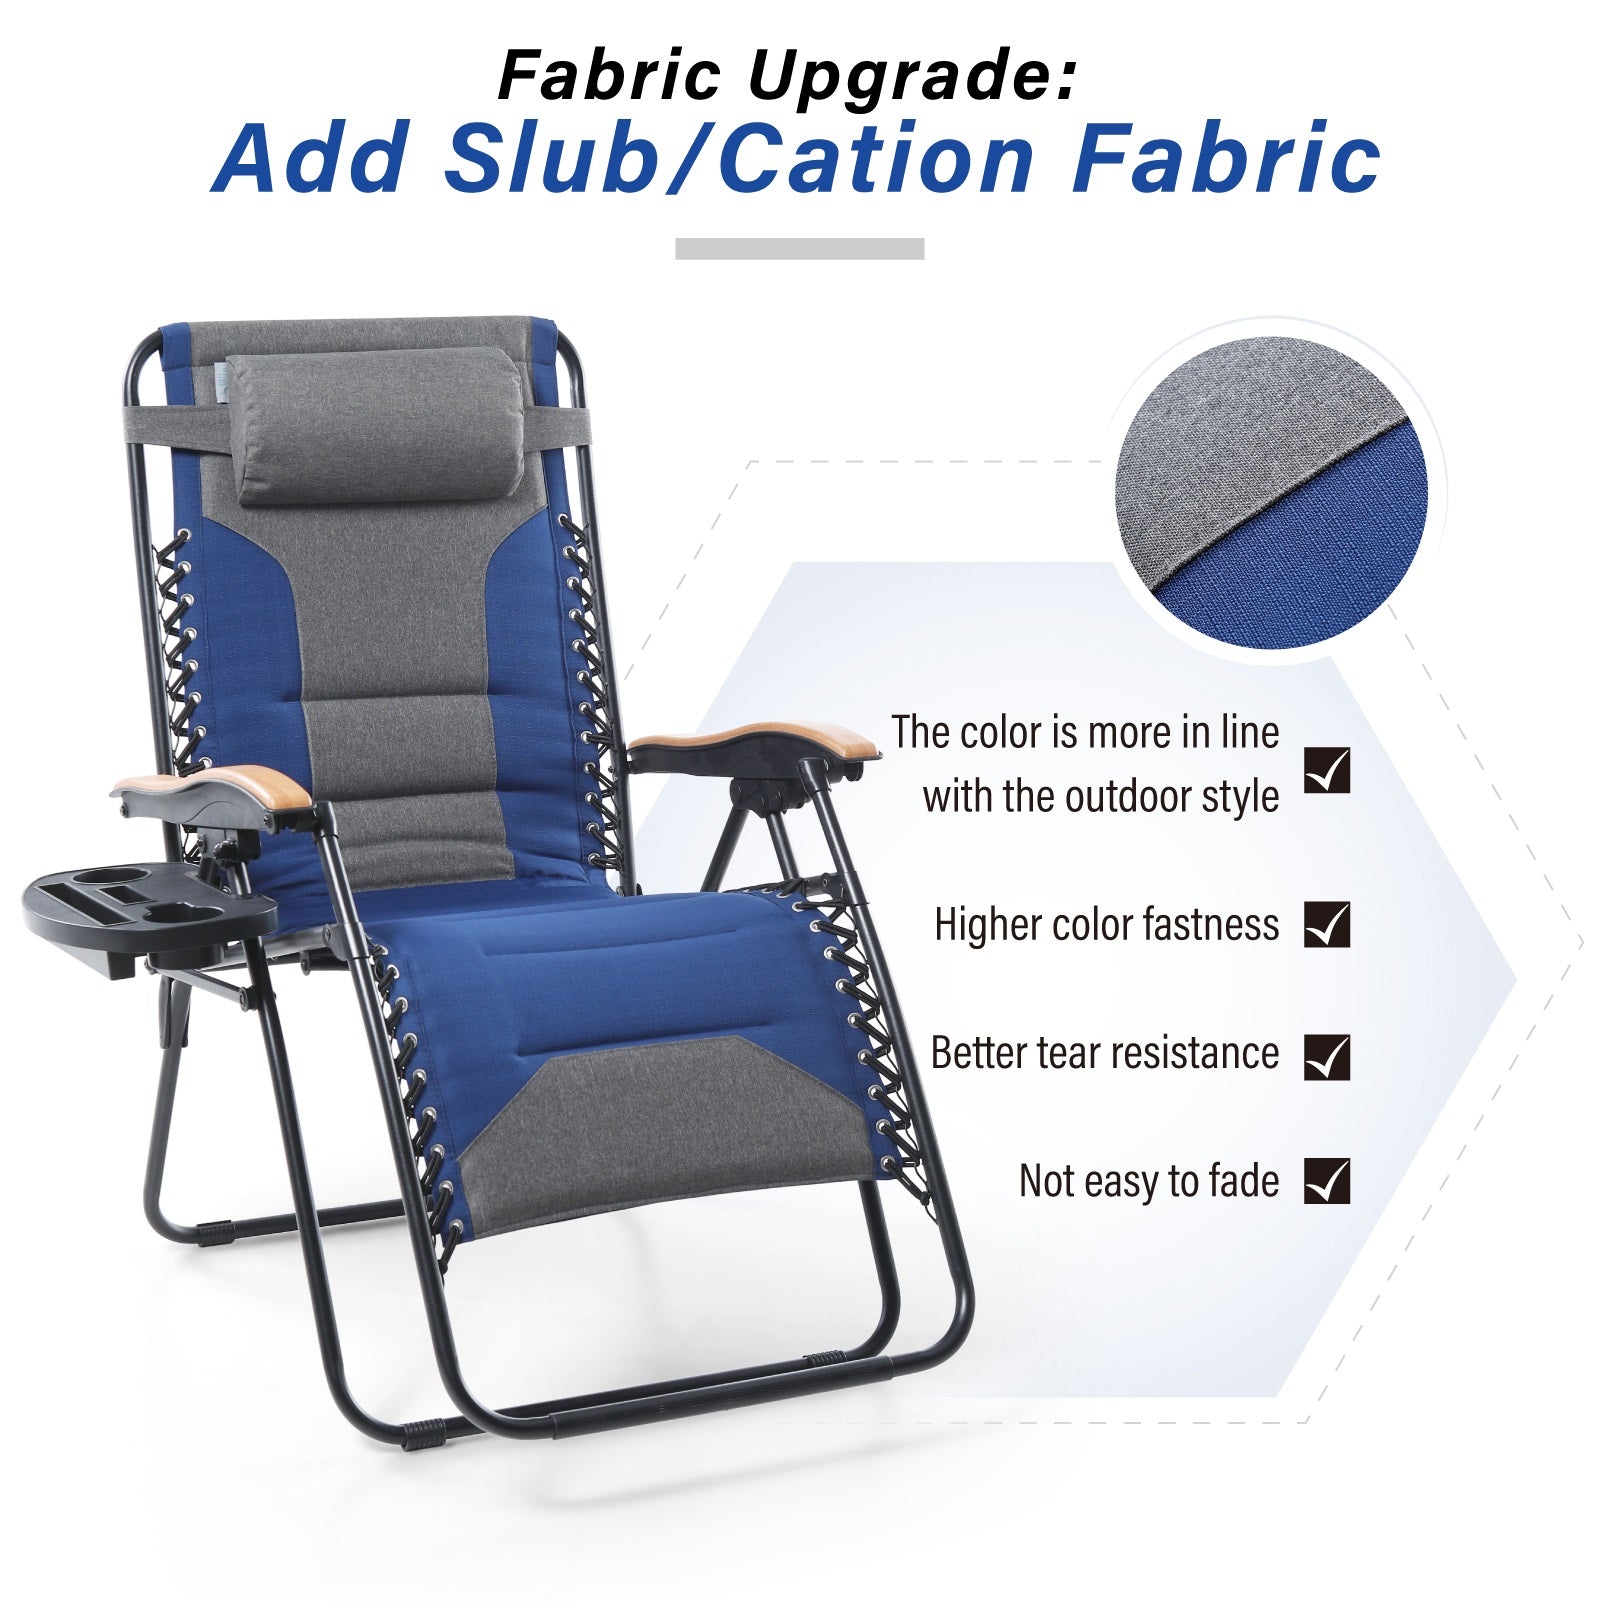 MFSTUDIO New Fabric Oversize Padded Zero Gravity Lounge Chair with Cup Holder